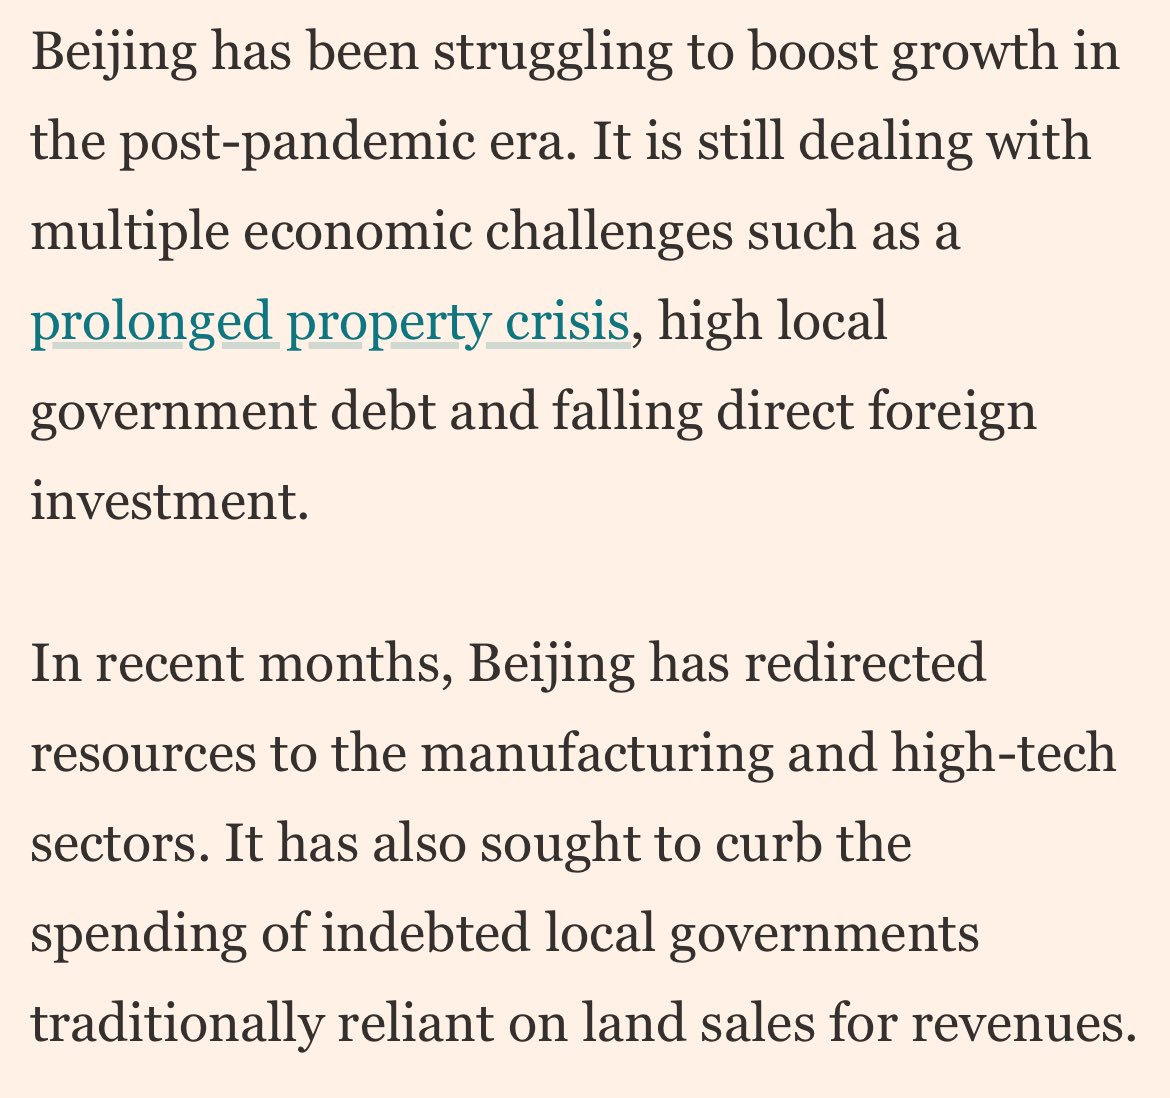 The anti China line of @ft means its journalism is increasingly incoherent. Yesterday it asked if the ‘EV revolution is running out of steam’. The *same day* it reported sales of Volkswagen EVs in China increased 91% (lol). Then they said China is struggling with 5% growth 🤡